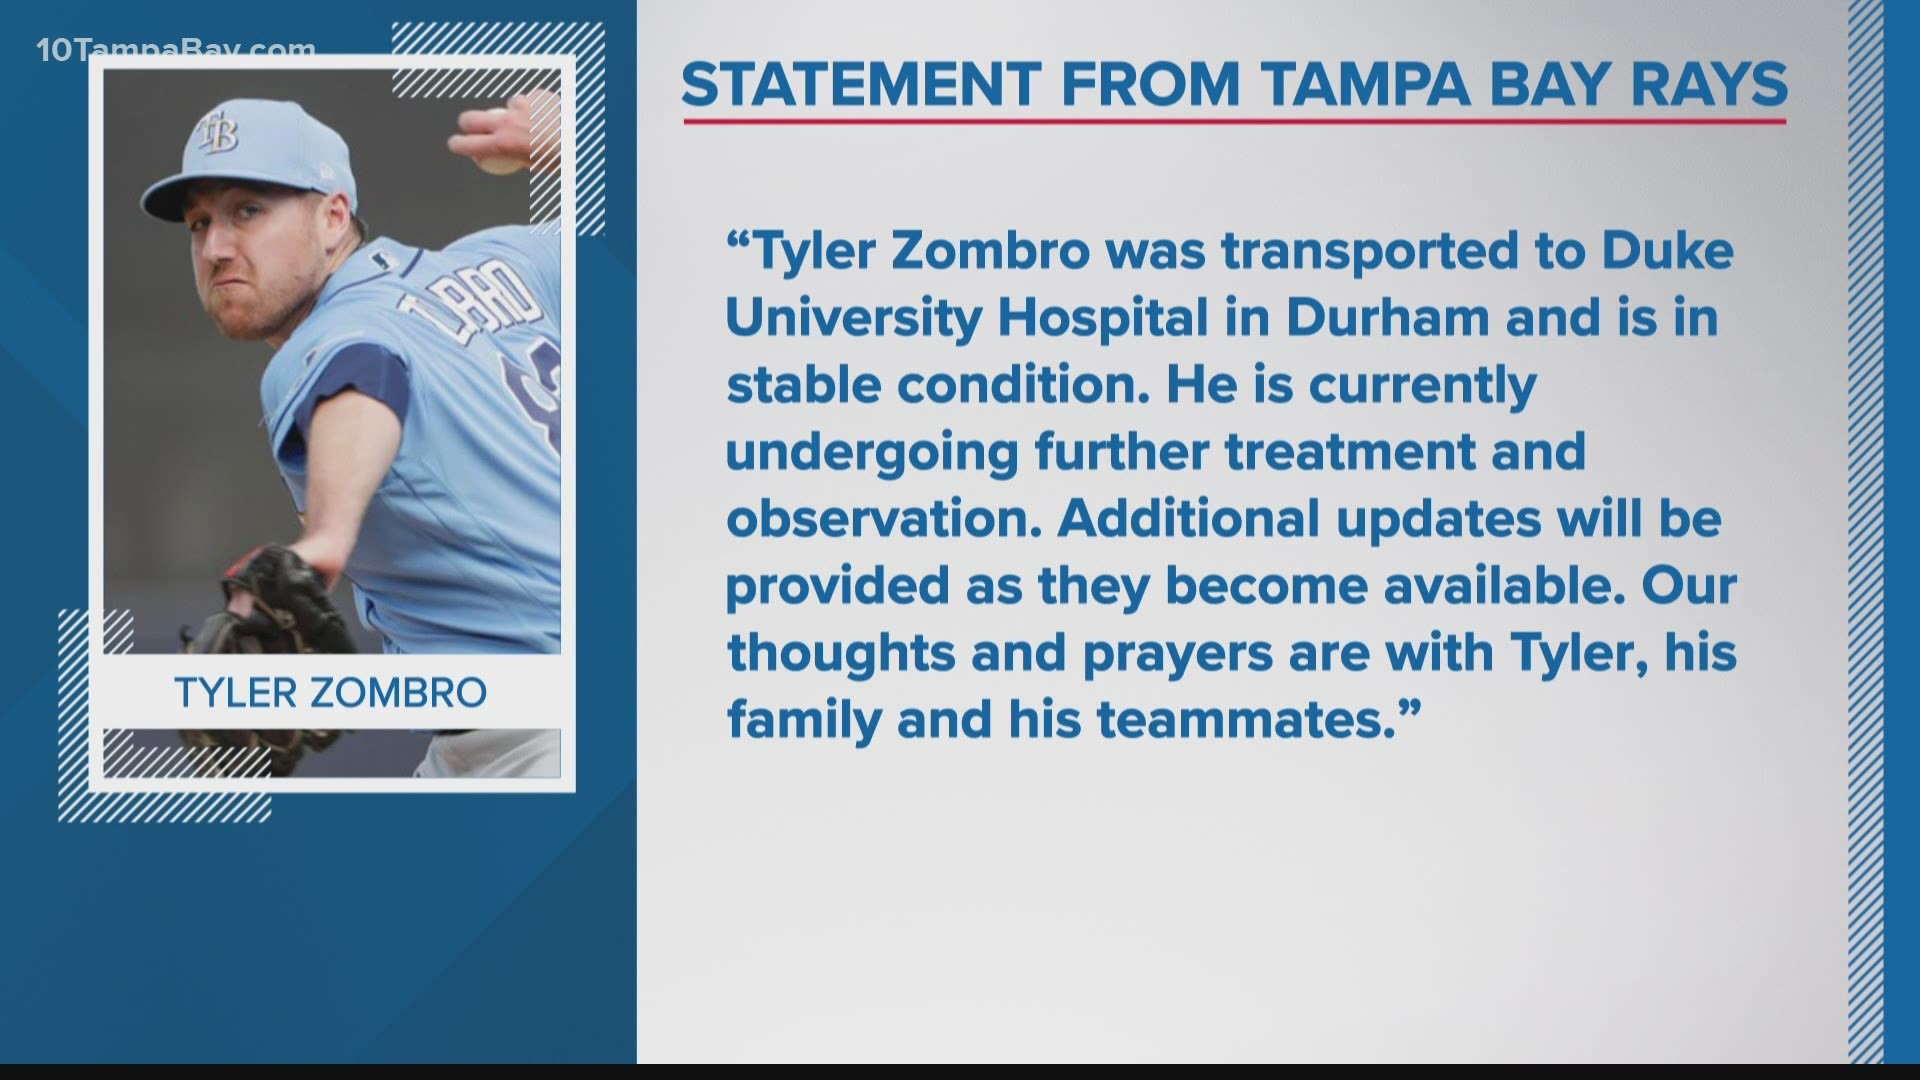 The Tampa Bay Rays say Tyler Zombro was taken to the hospital and is in stable condition.